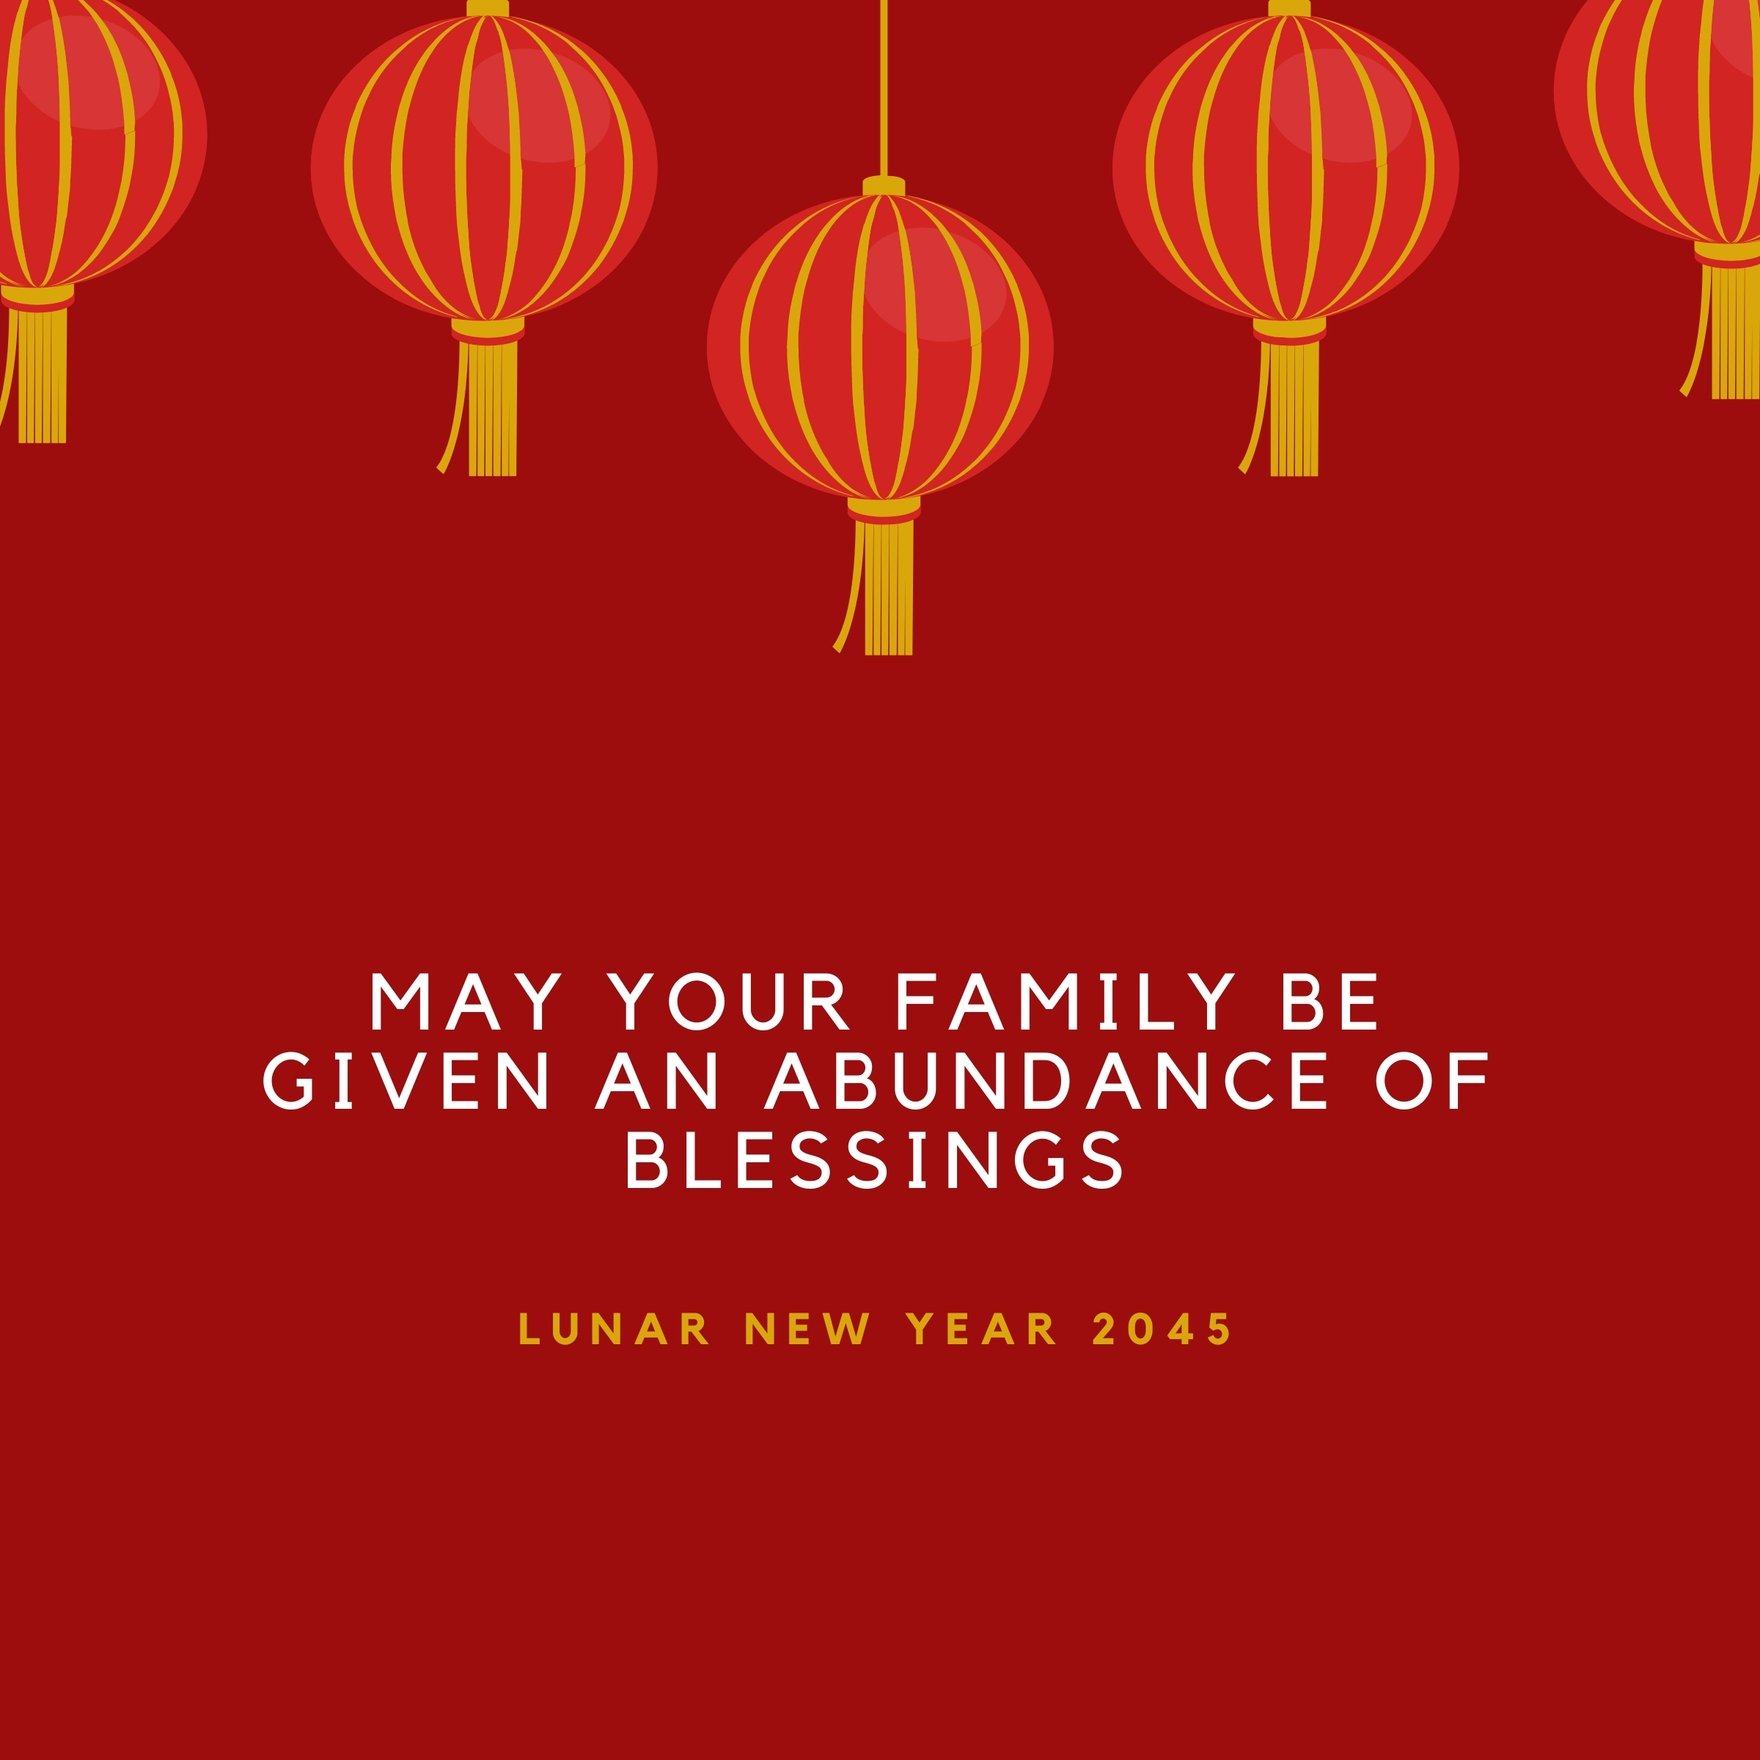 Chinese New Year Whatsapp Post in Illustrator, PSD, EPS, SVG, PNG, JPEG